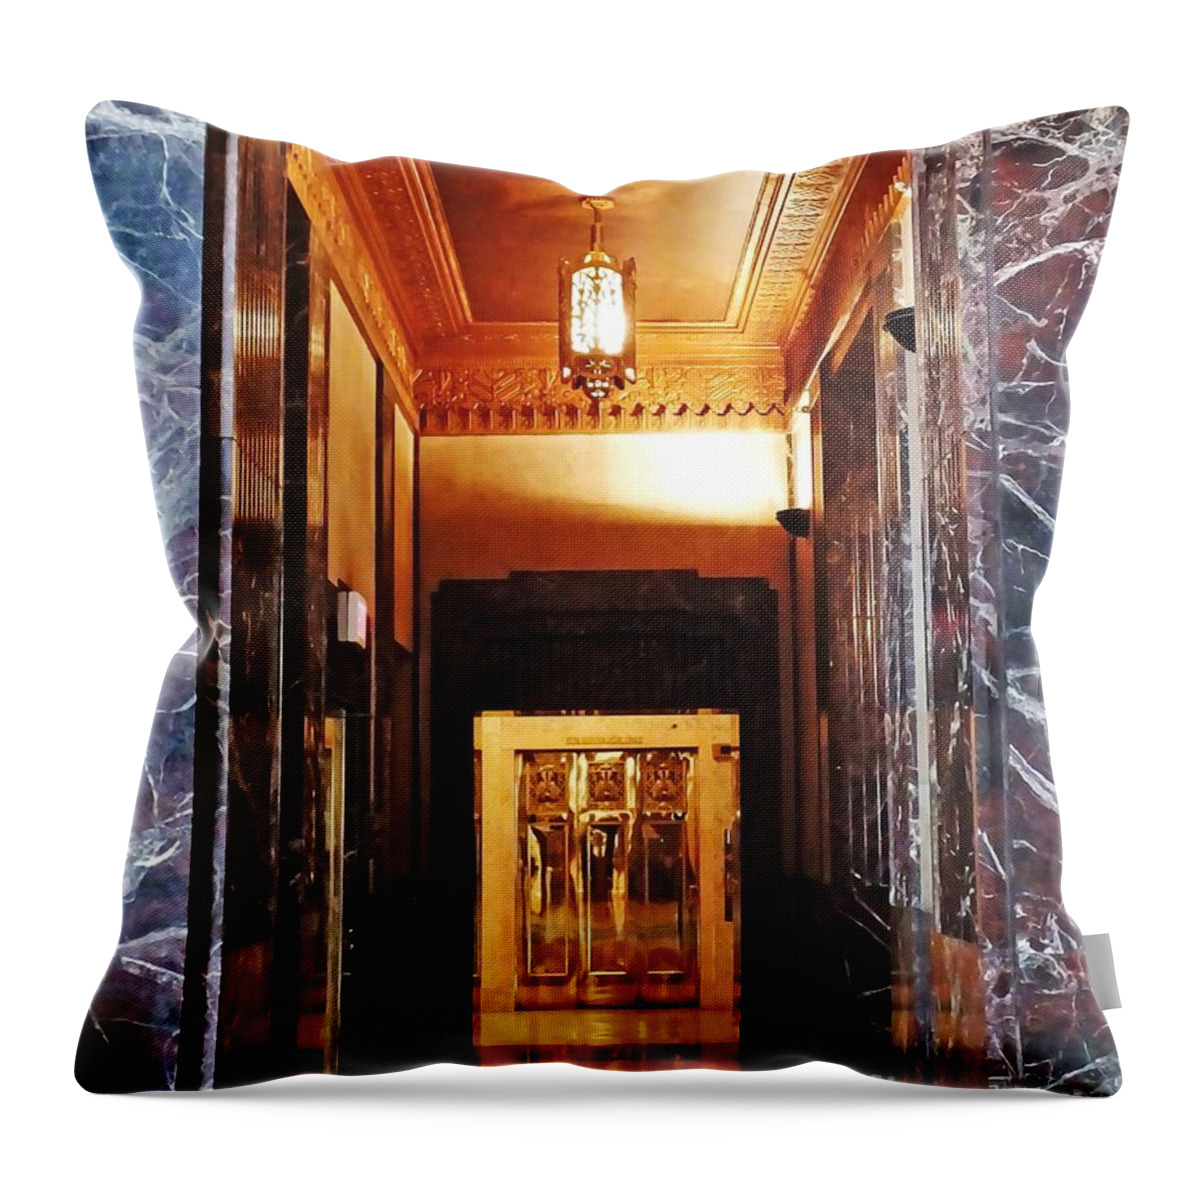 Gold Throw Pillow featuring the photograph Elevator Louisiana State Capitol by Lizi Beard-Ward